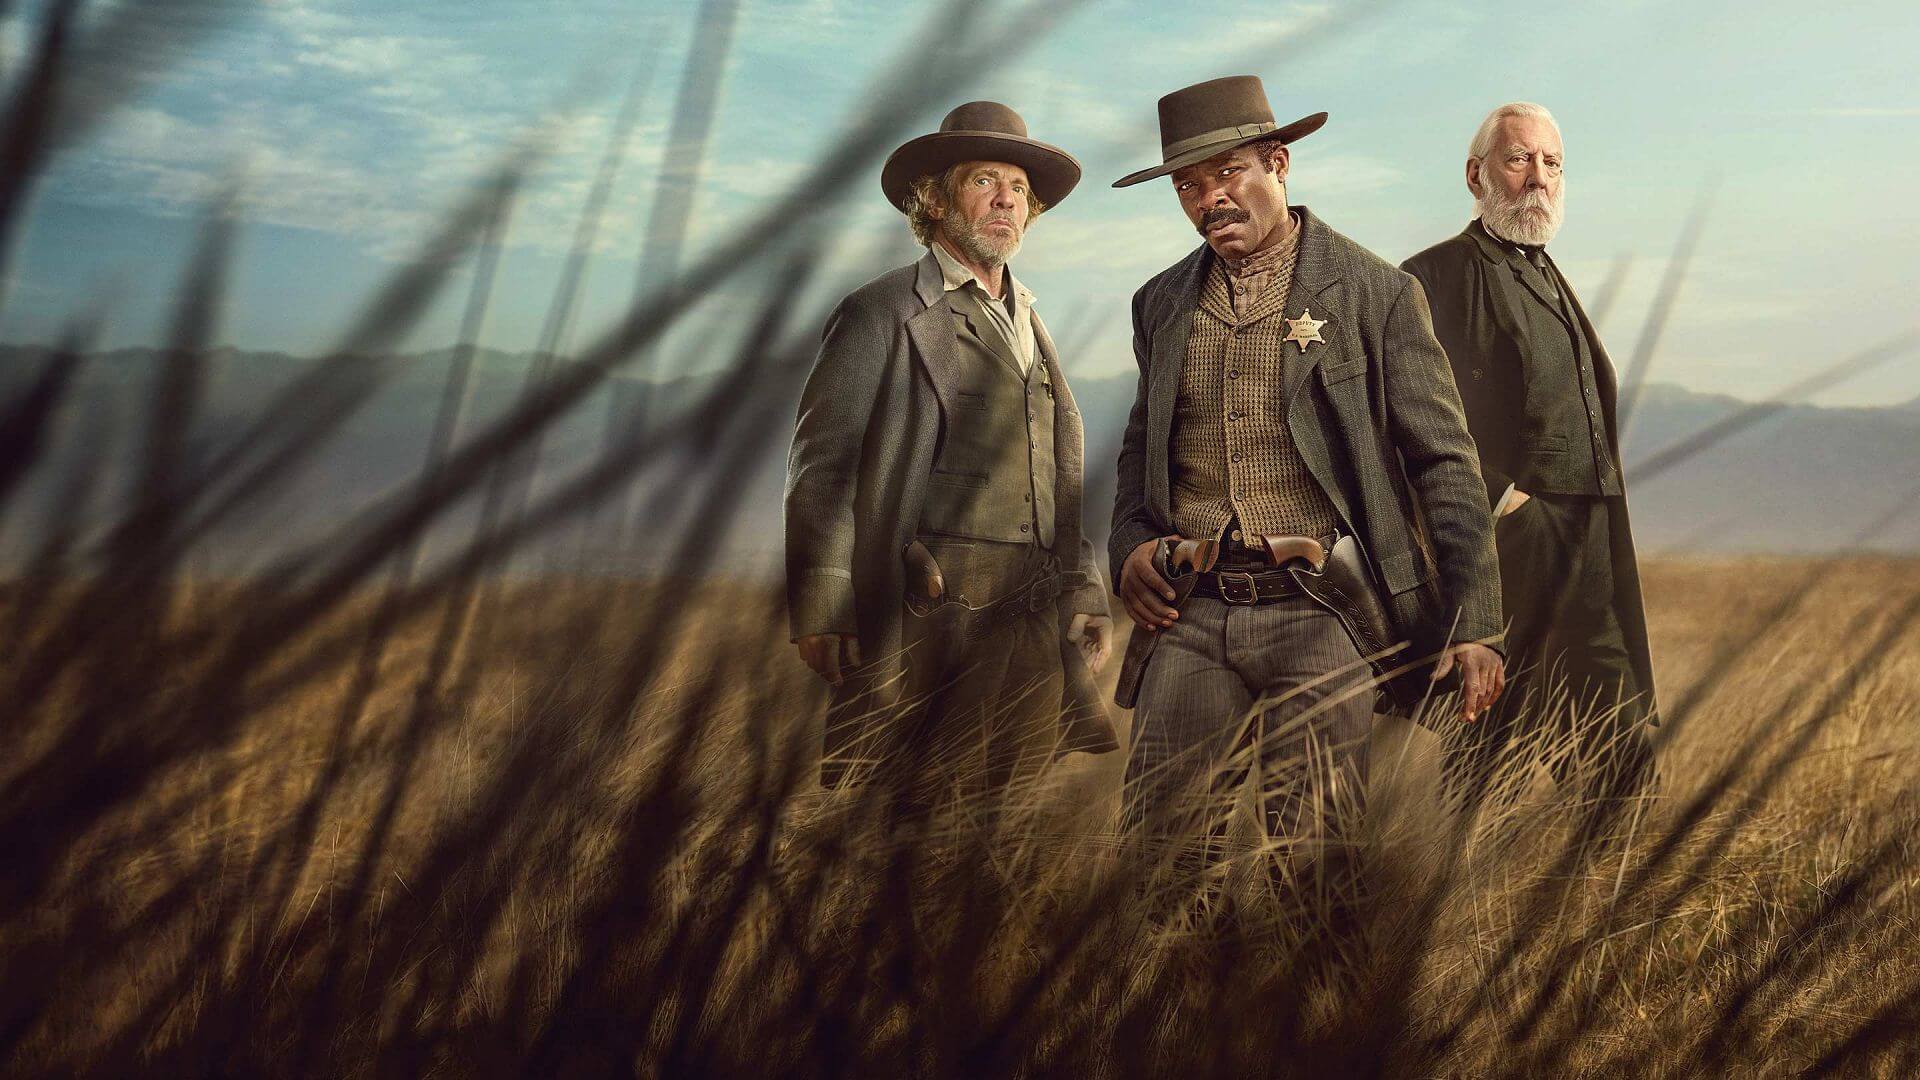 Watch-best-taylor-sheridan-series-lawmen-bass-reeves-outside-USA-on-Paramount-Plus